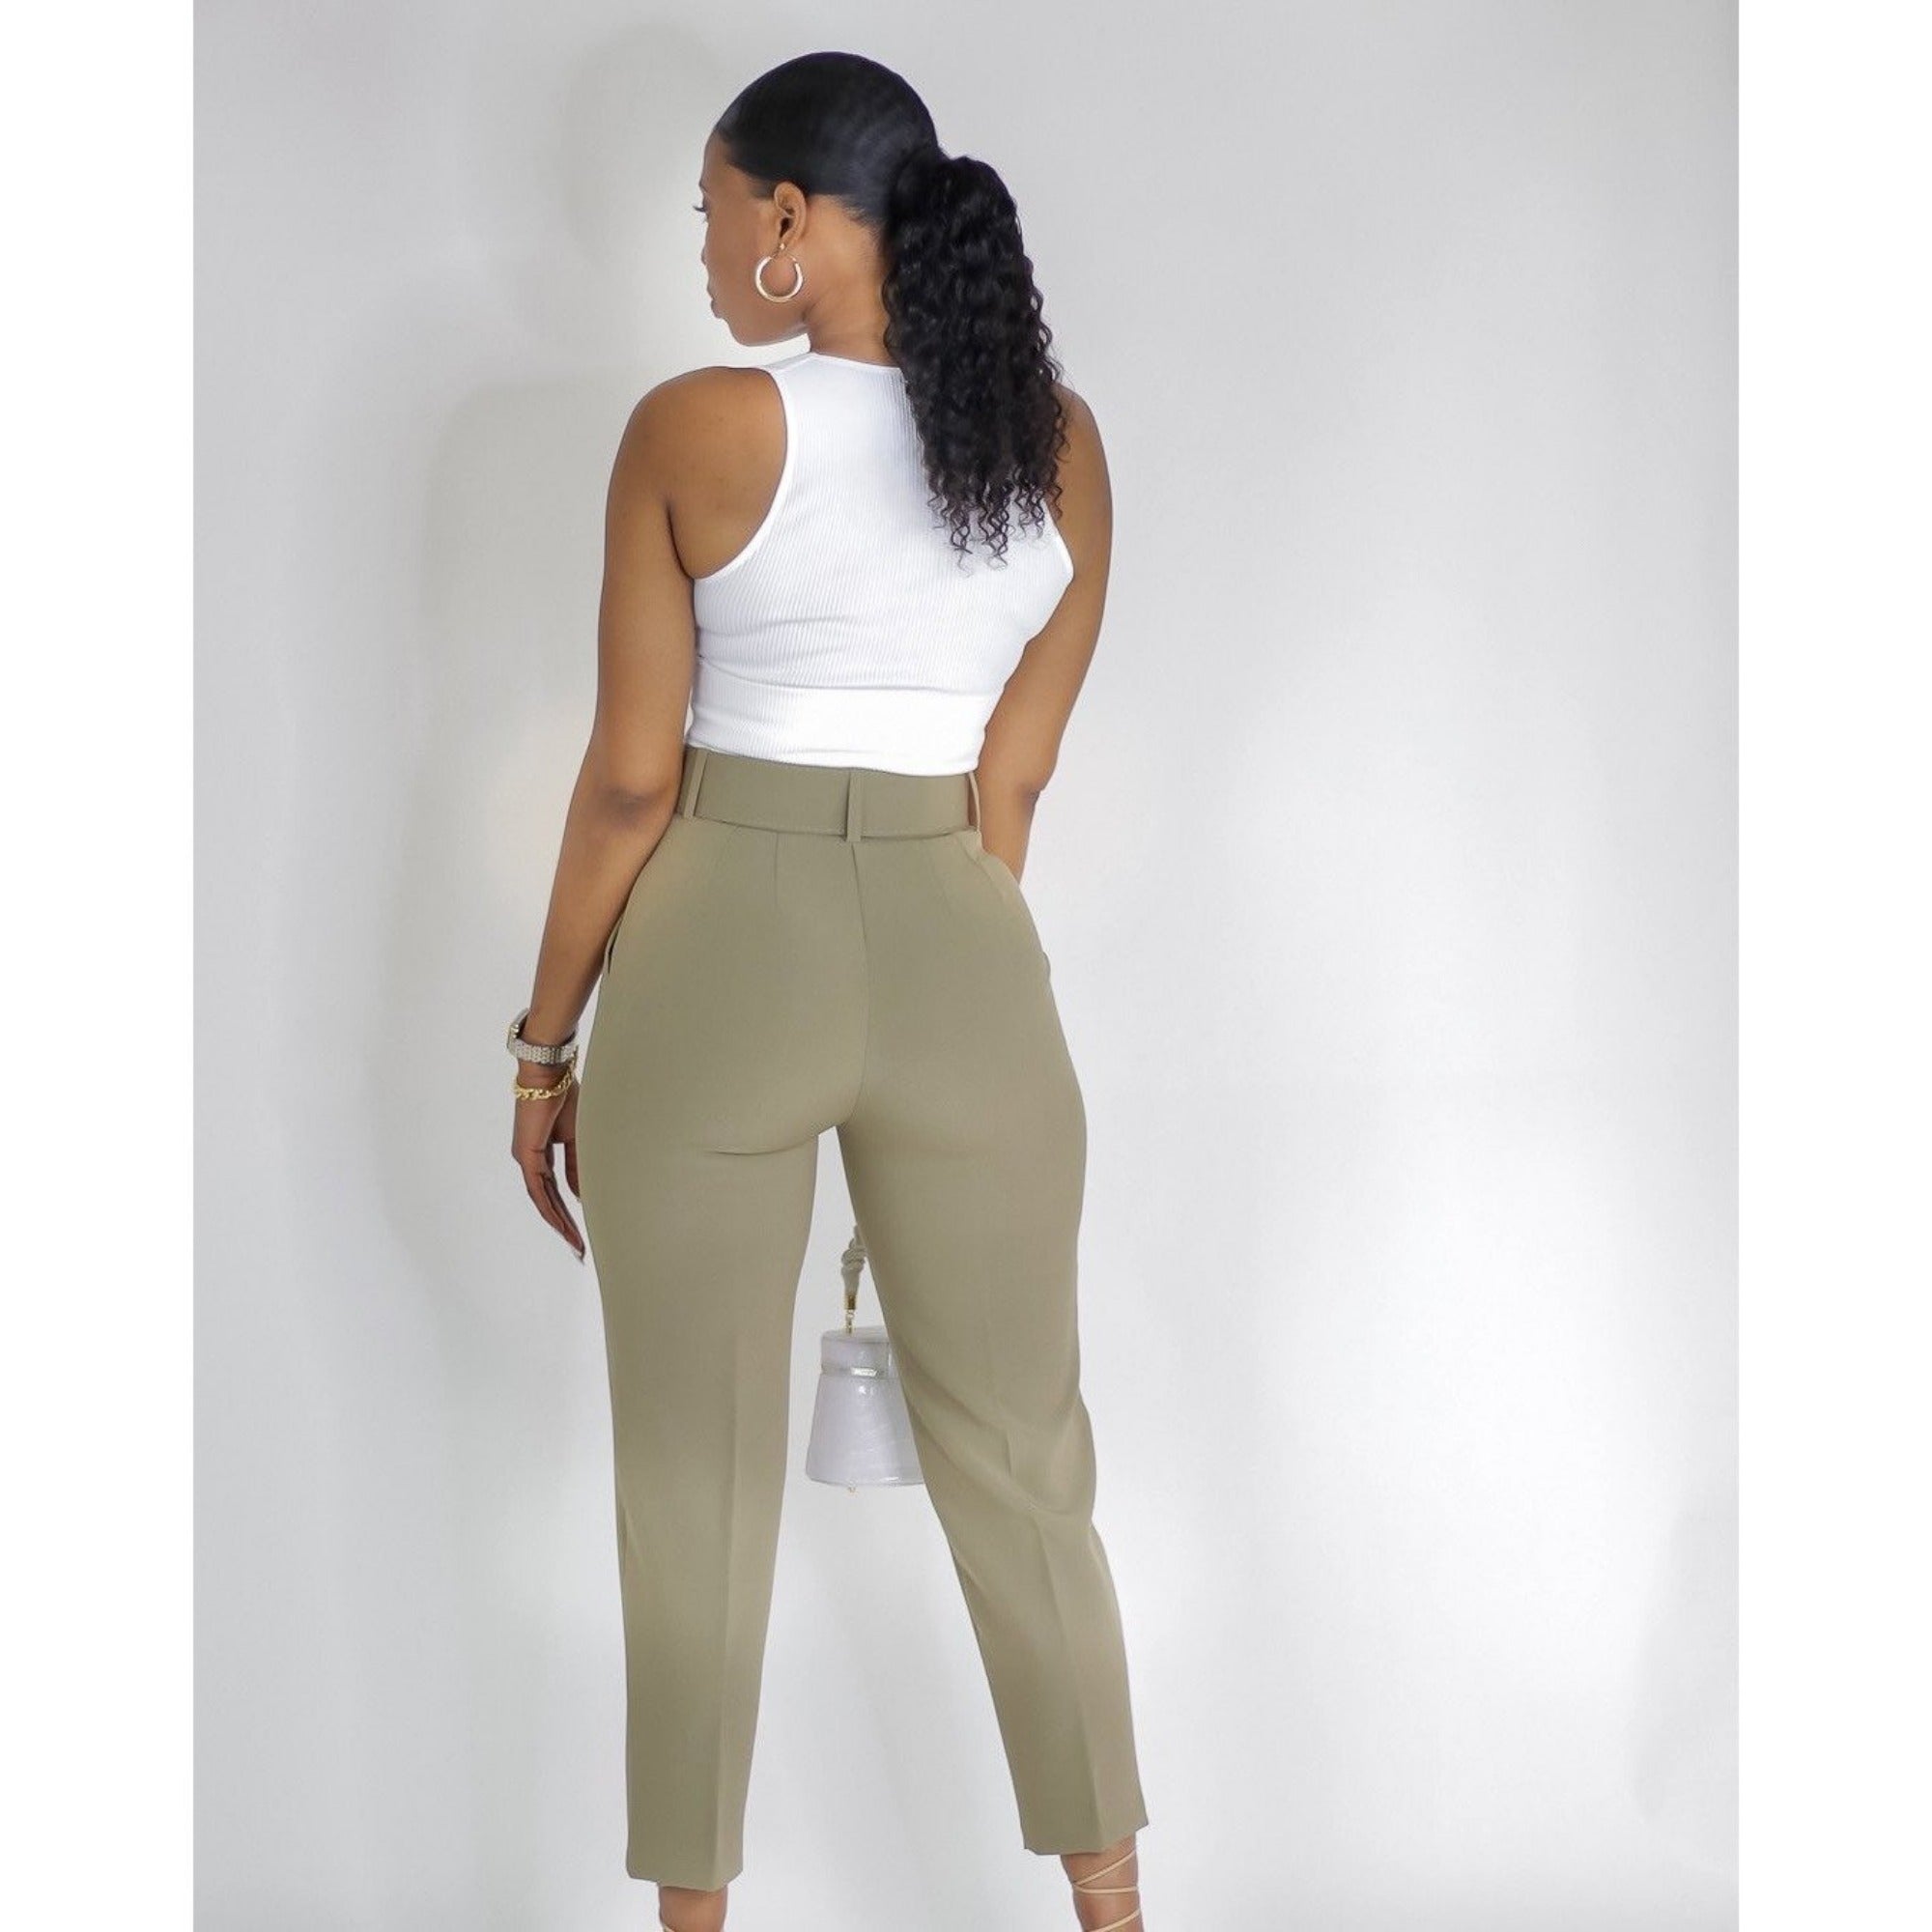 OLIVE HIGH WAIST BELTED PANTS – Glamconic